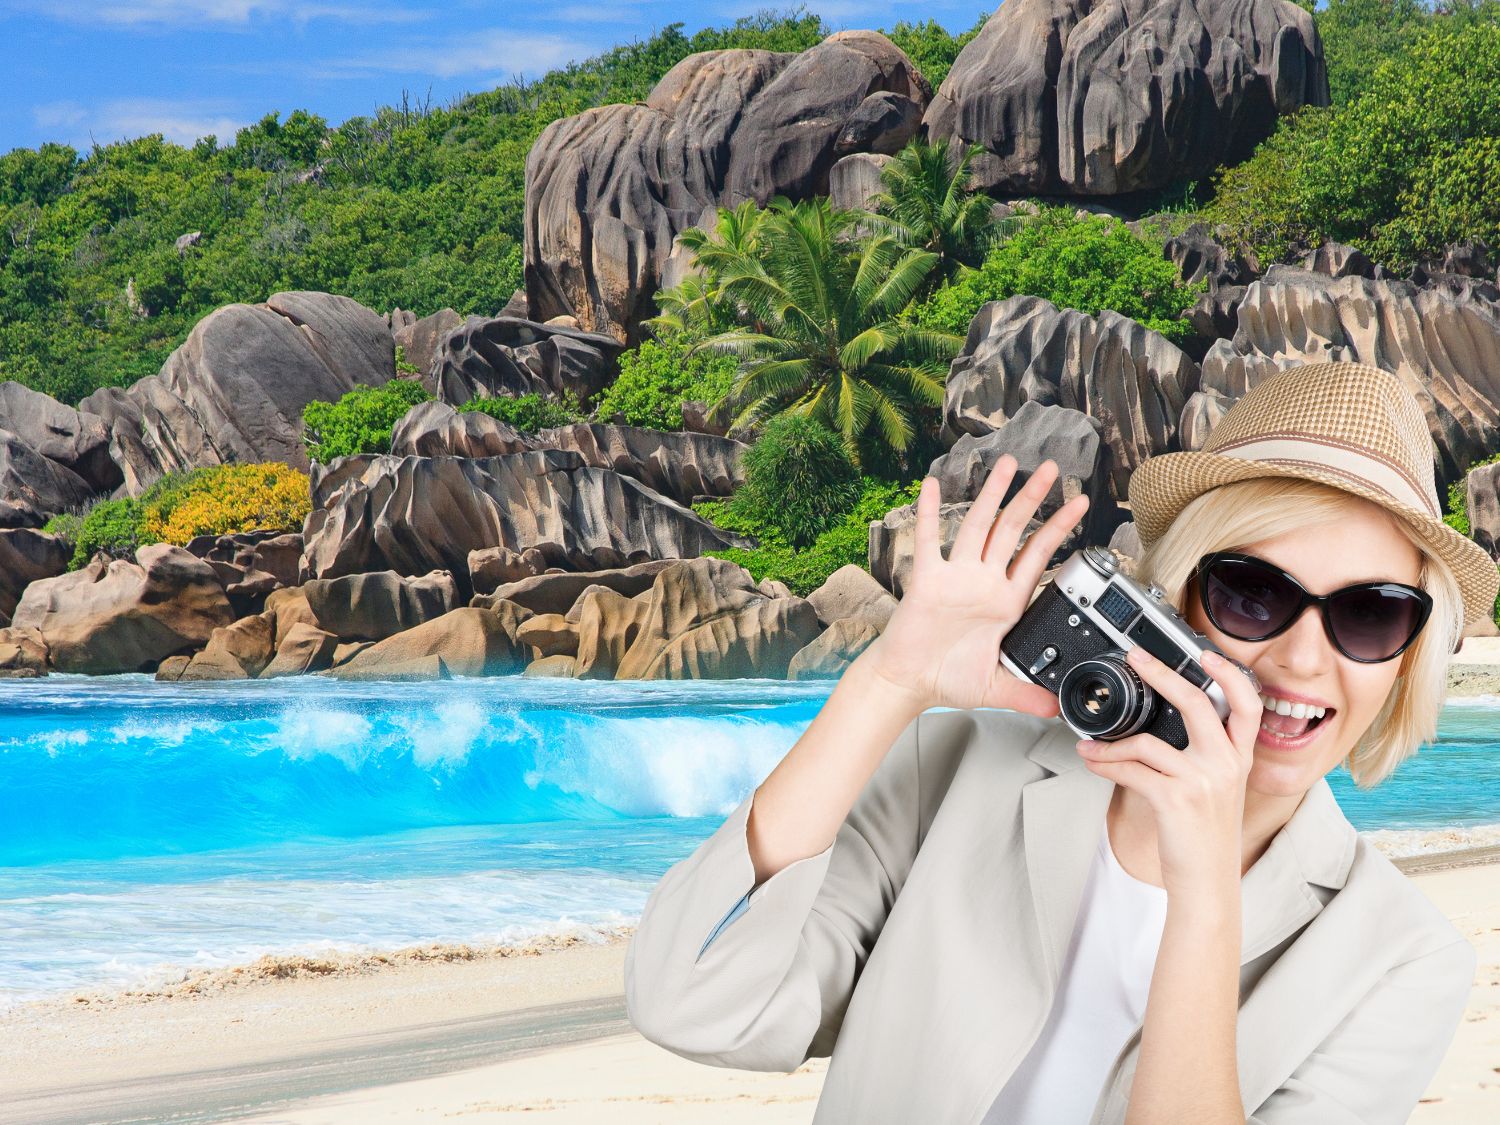 The 6 Best Seychelles Tours For Unforgettable Adventures That Are Achievable & Affordable